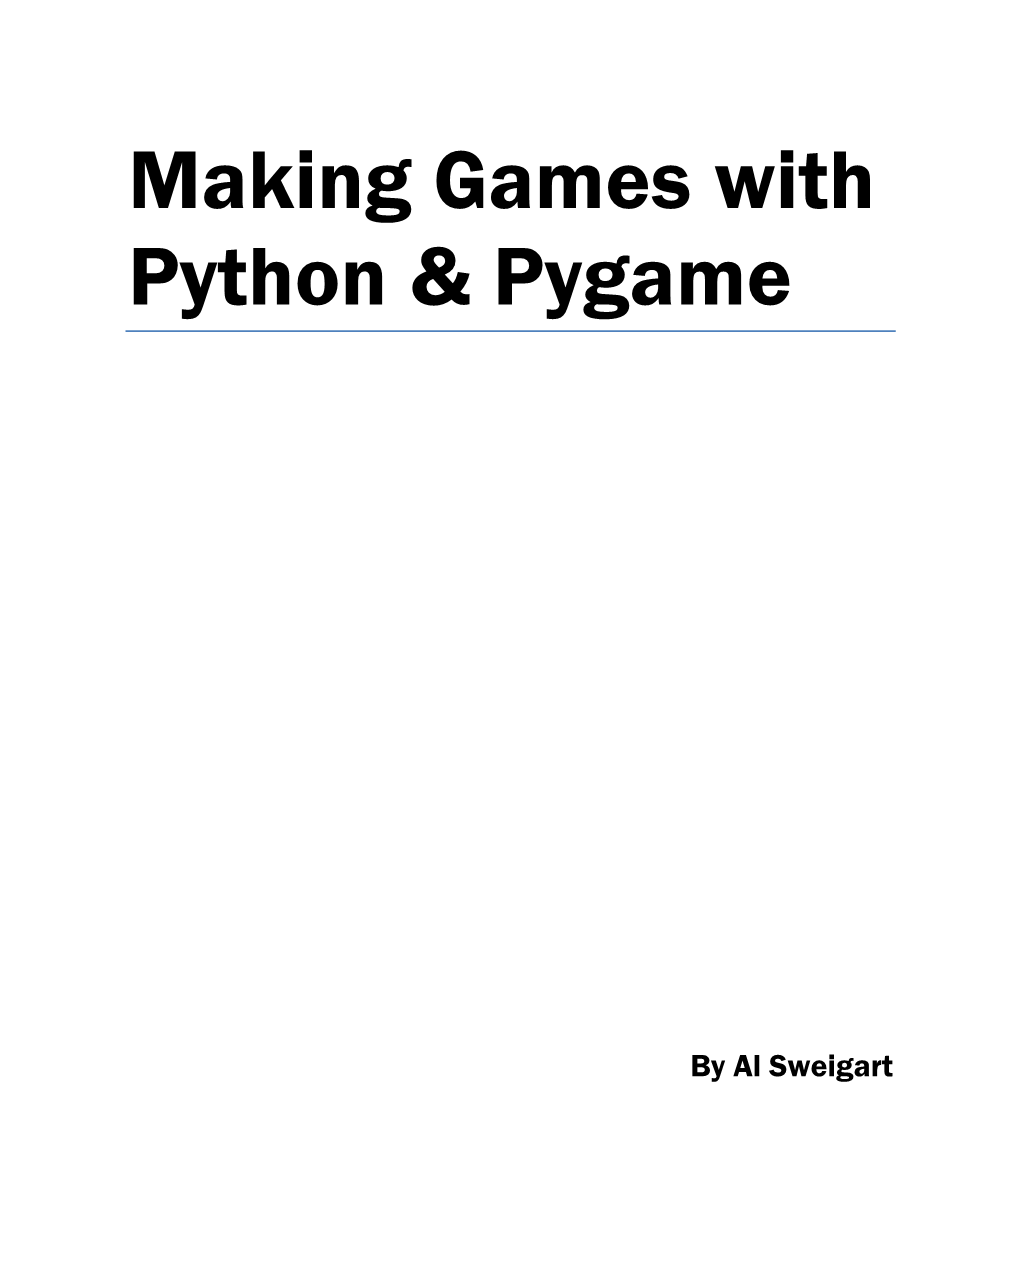 PDF of Making Games with Python & Pygame